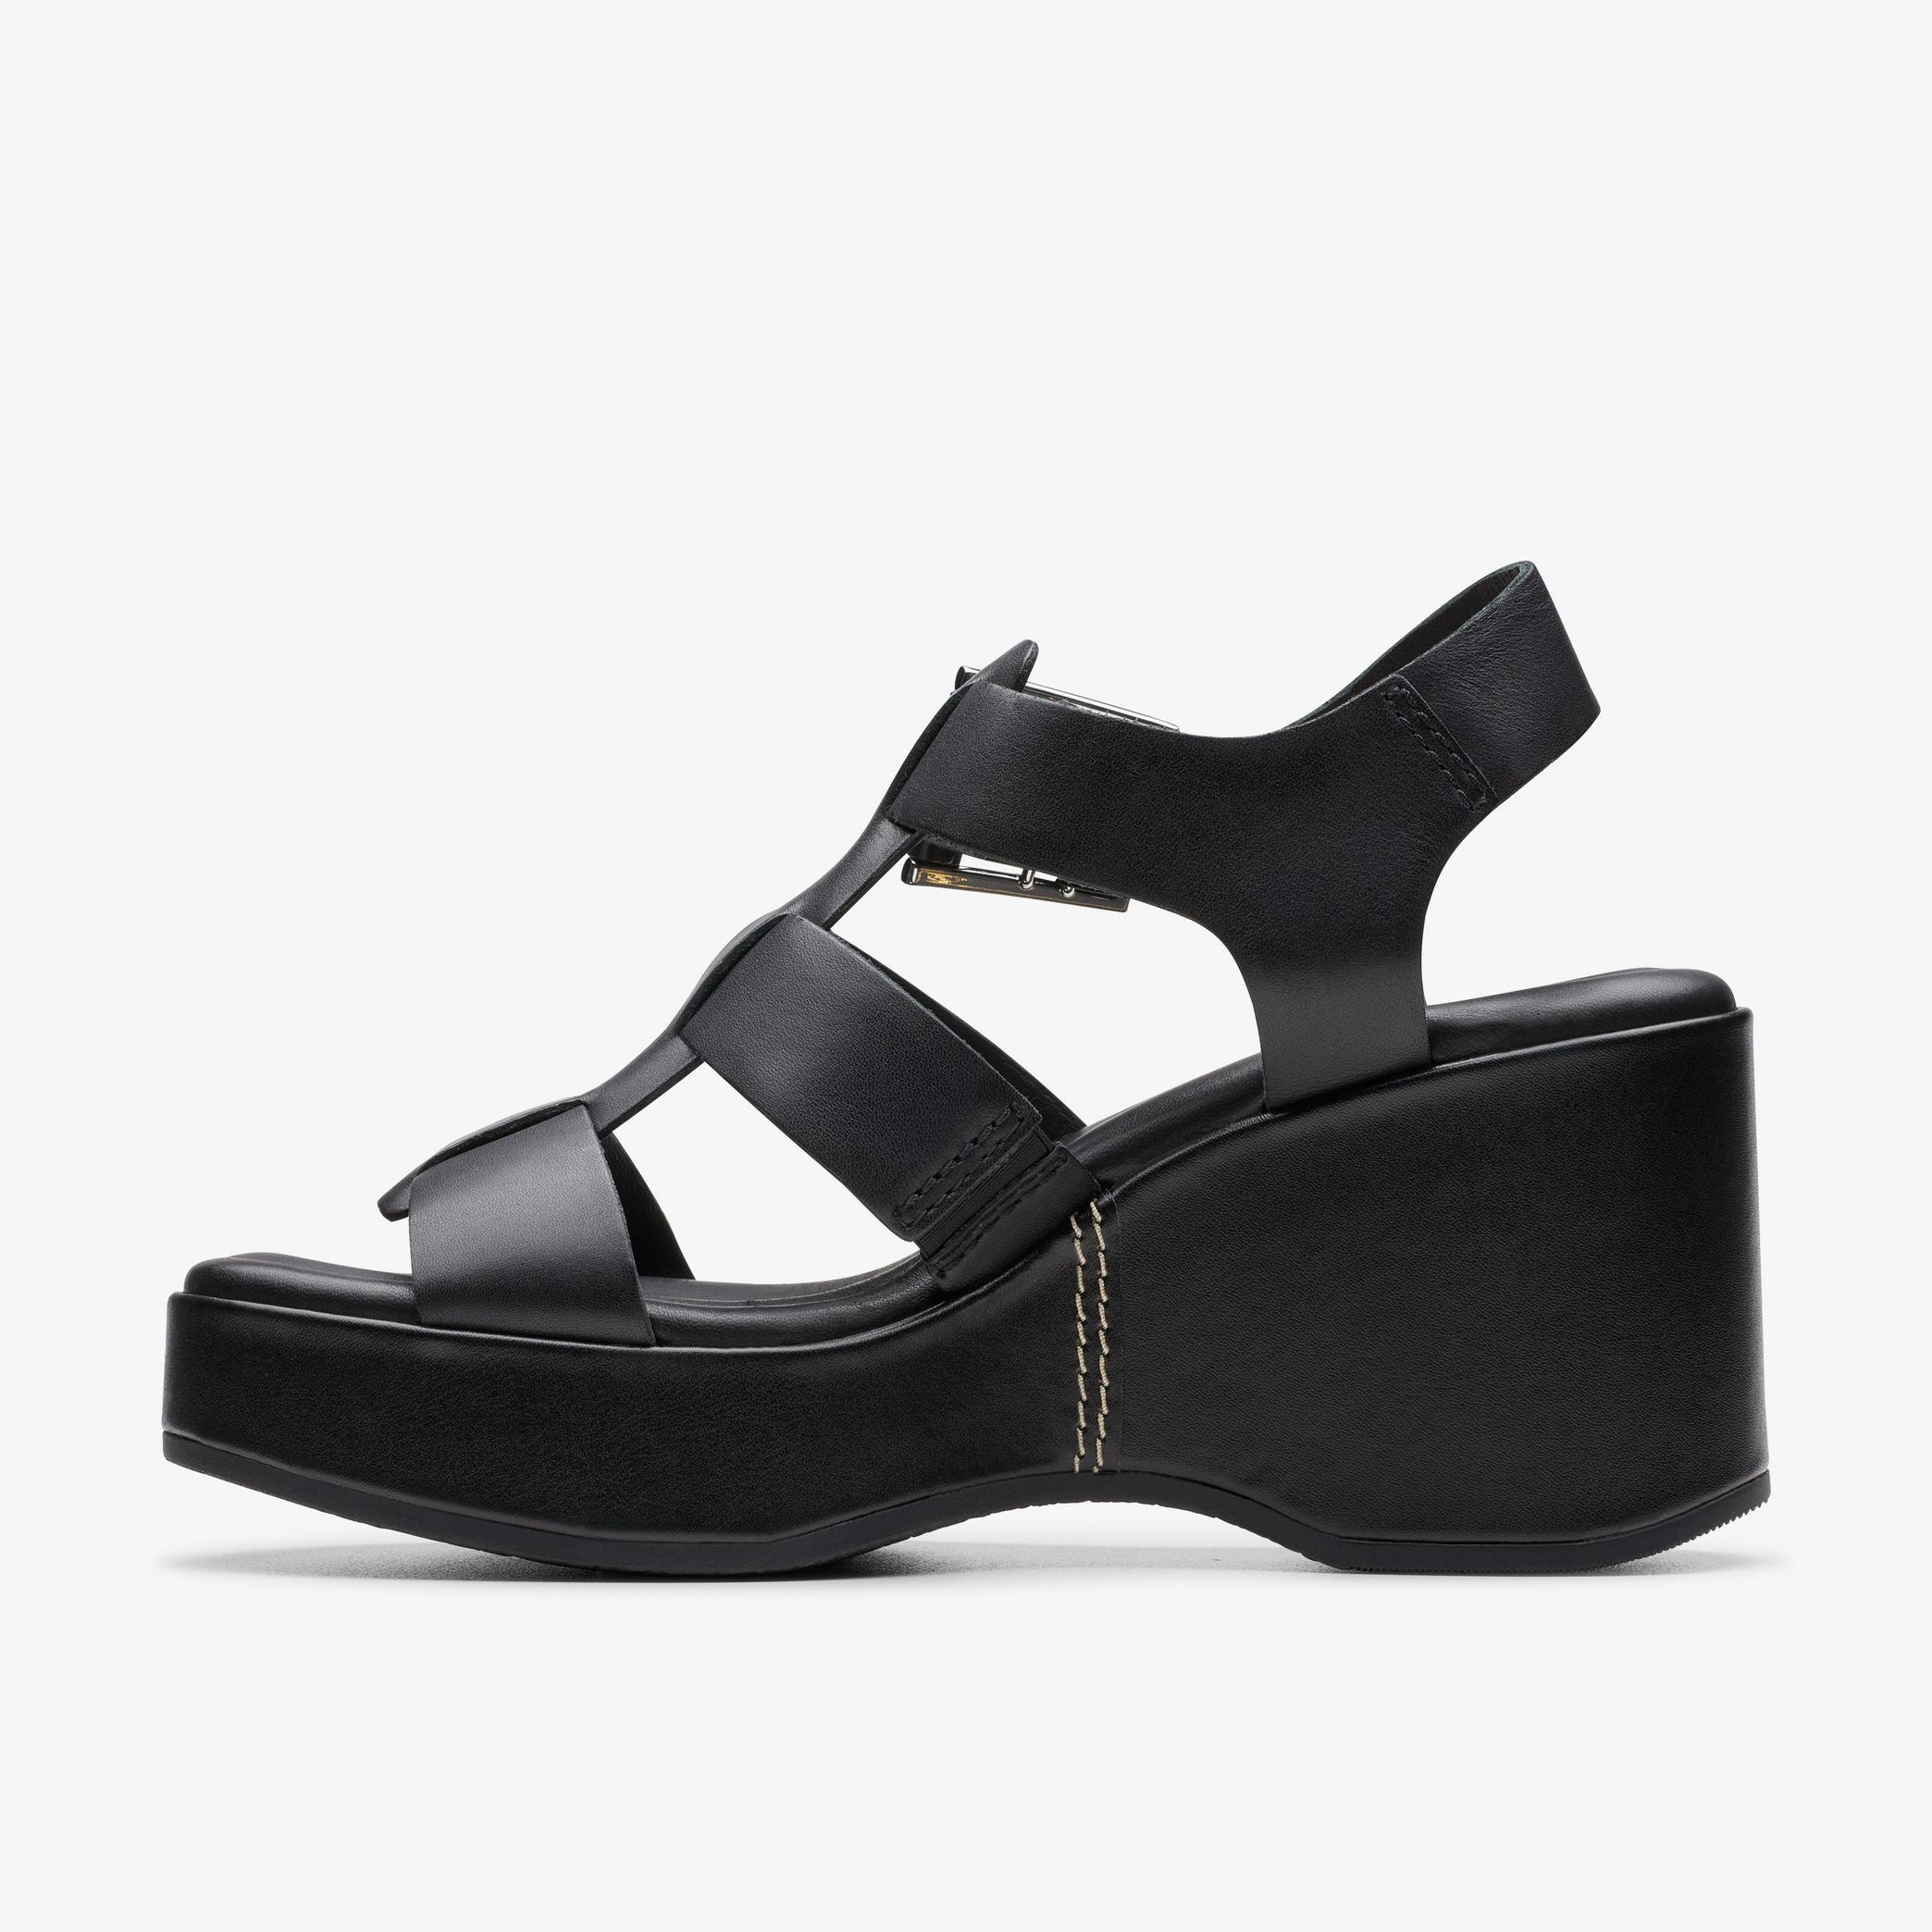 WOMENS Manon Cove Black Leather Heeled Sandals | Clarks US